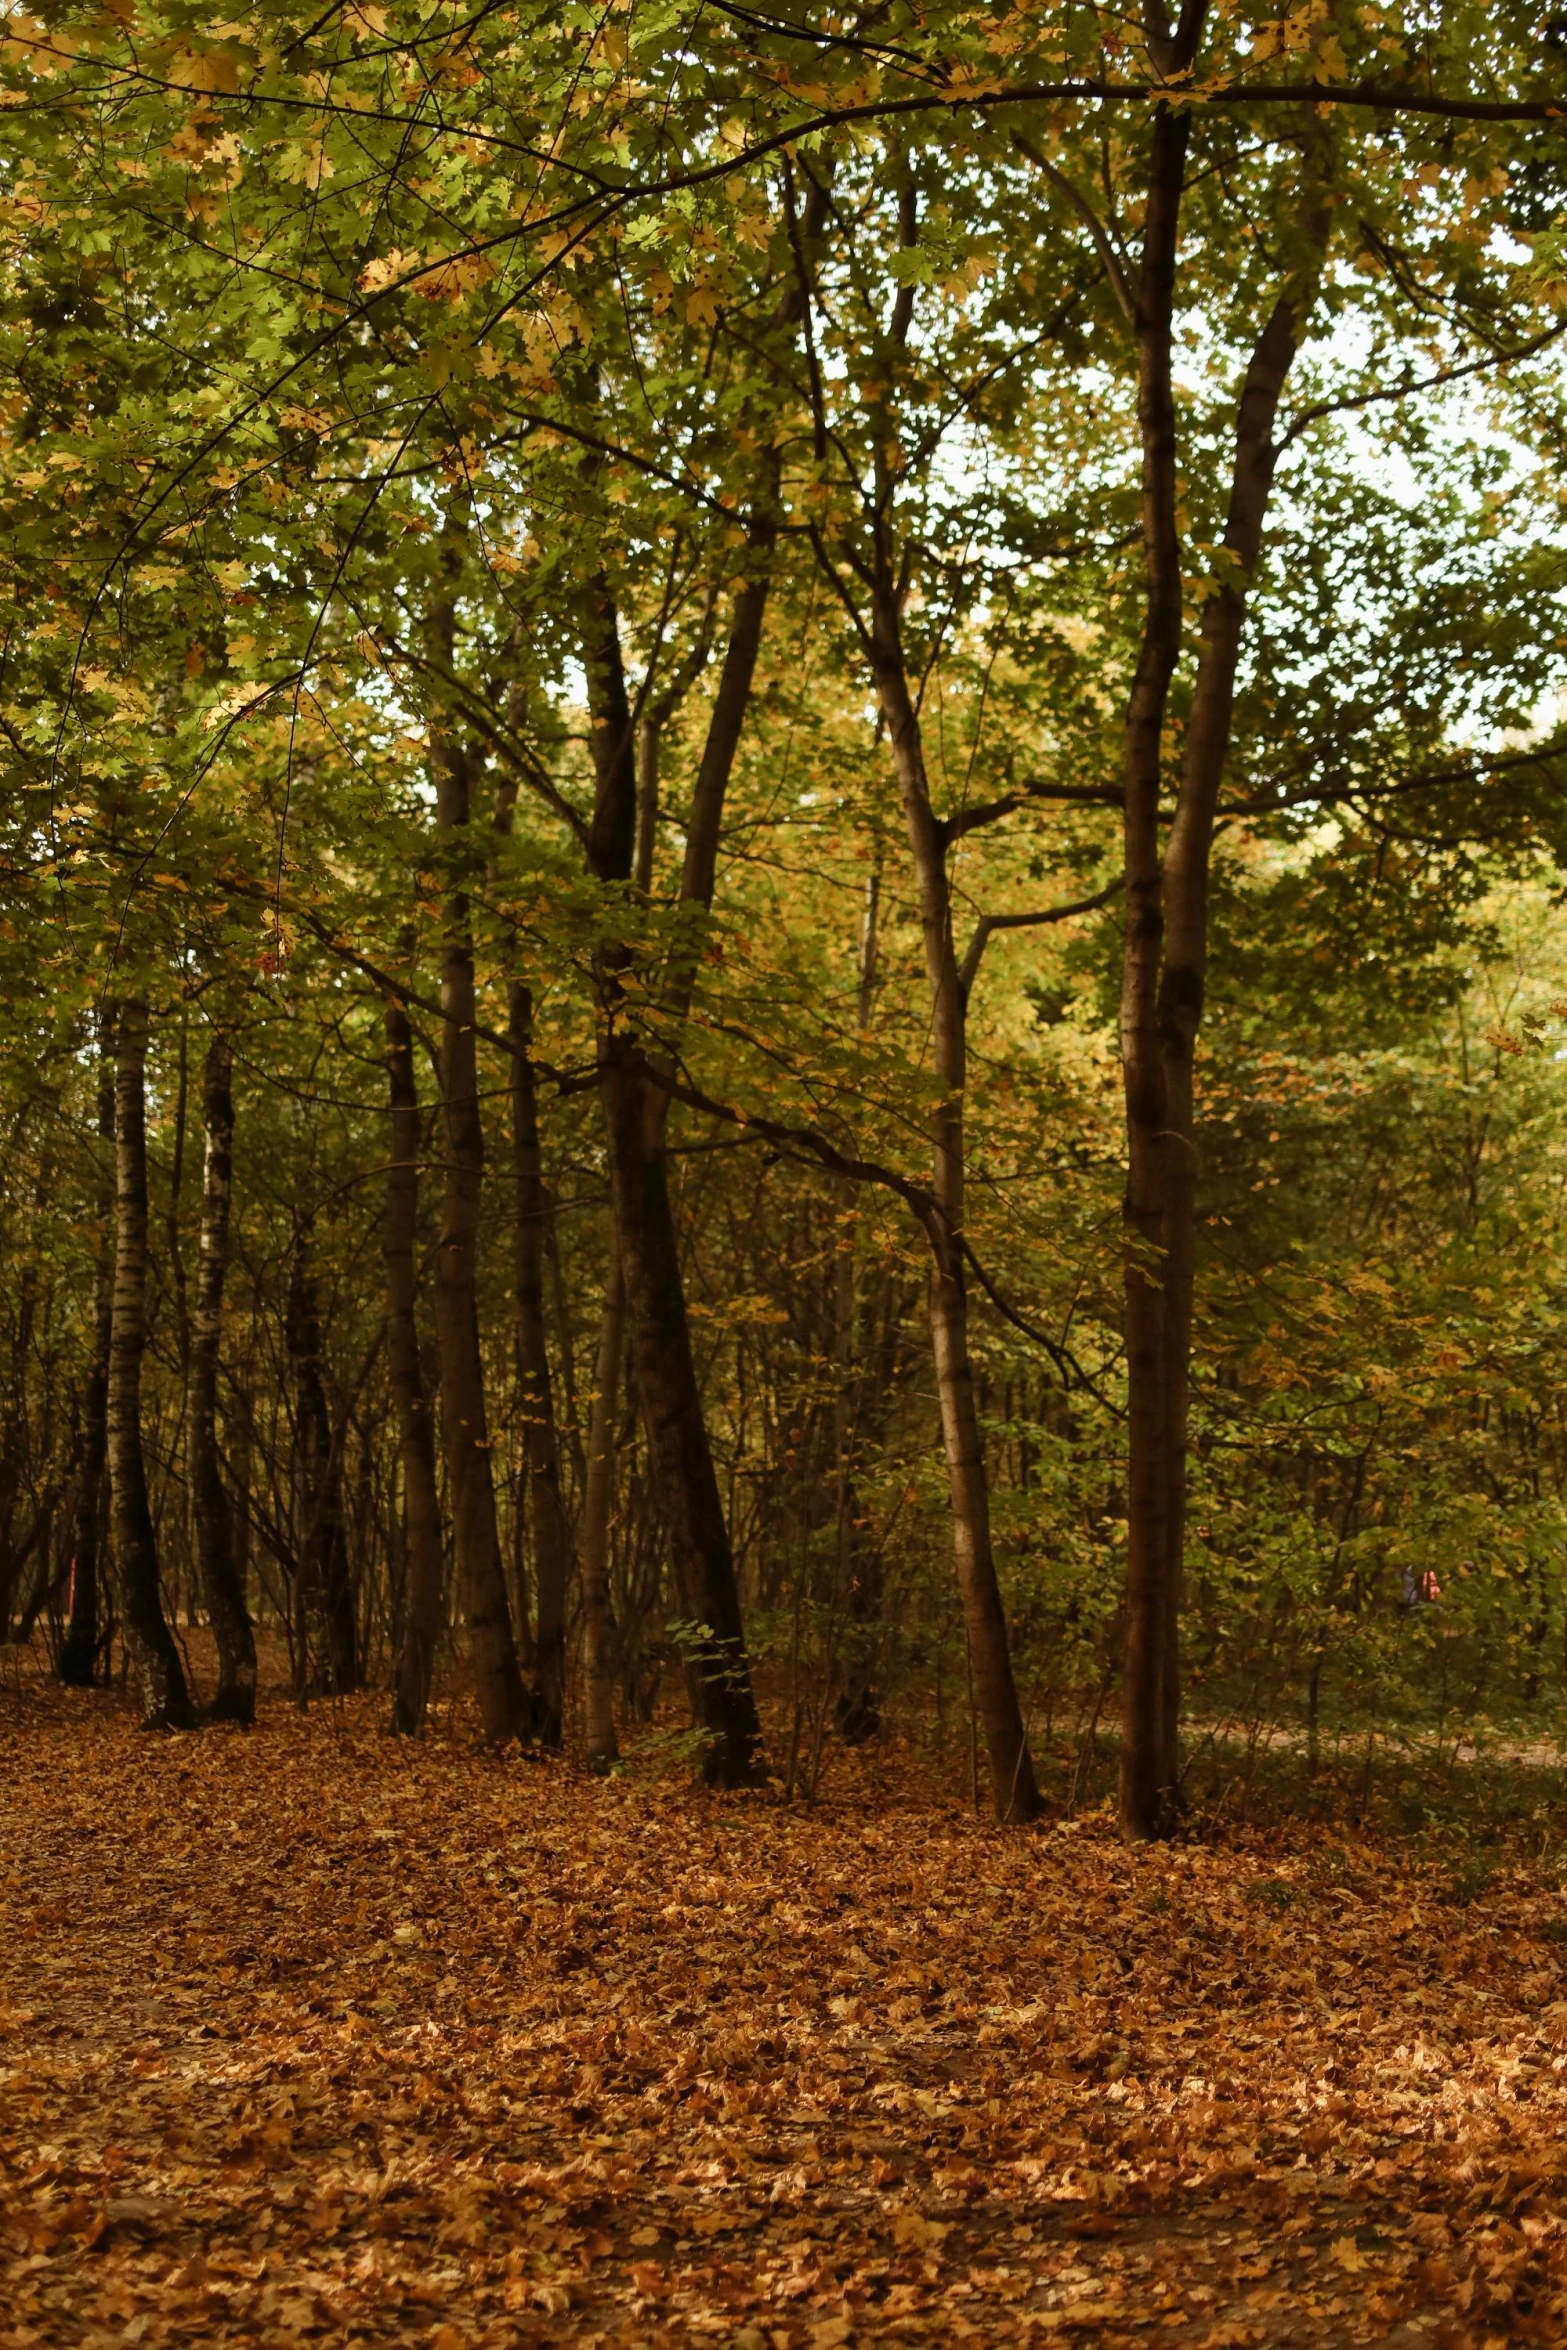 a red fire hydrant sitting in the middle of a forest, by Jan Tengnagel, panoramic photography, brown, fall, long